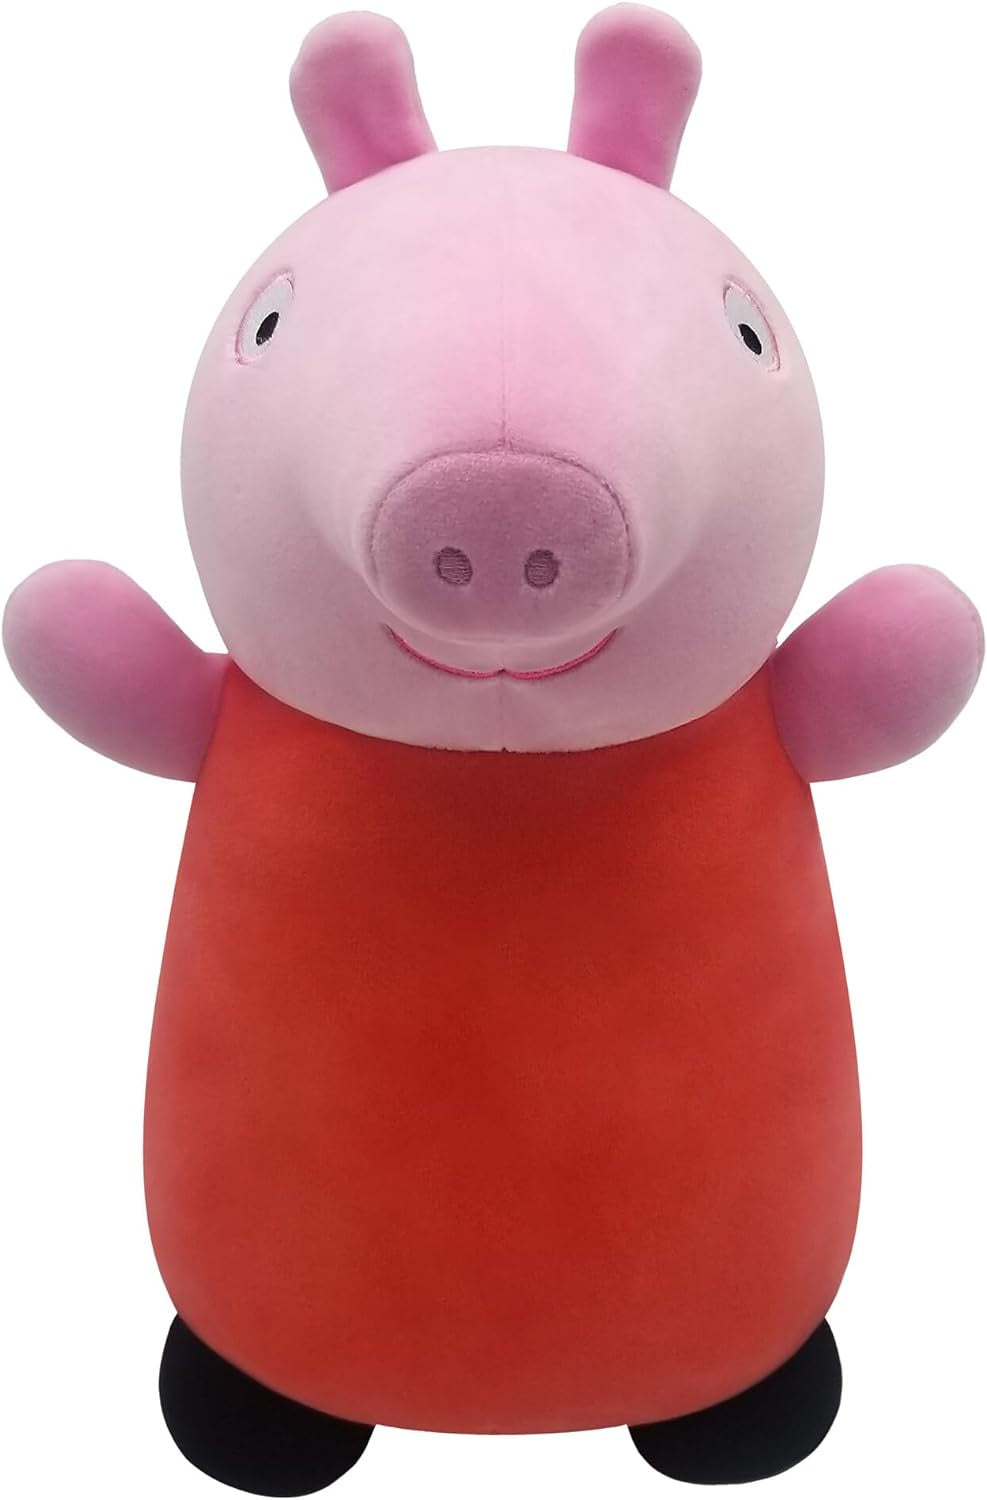 Peppa Pig Squishmallow 10" Soft Toy